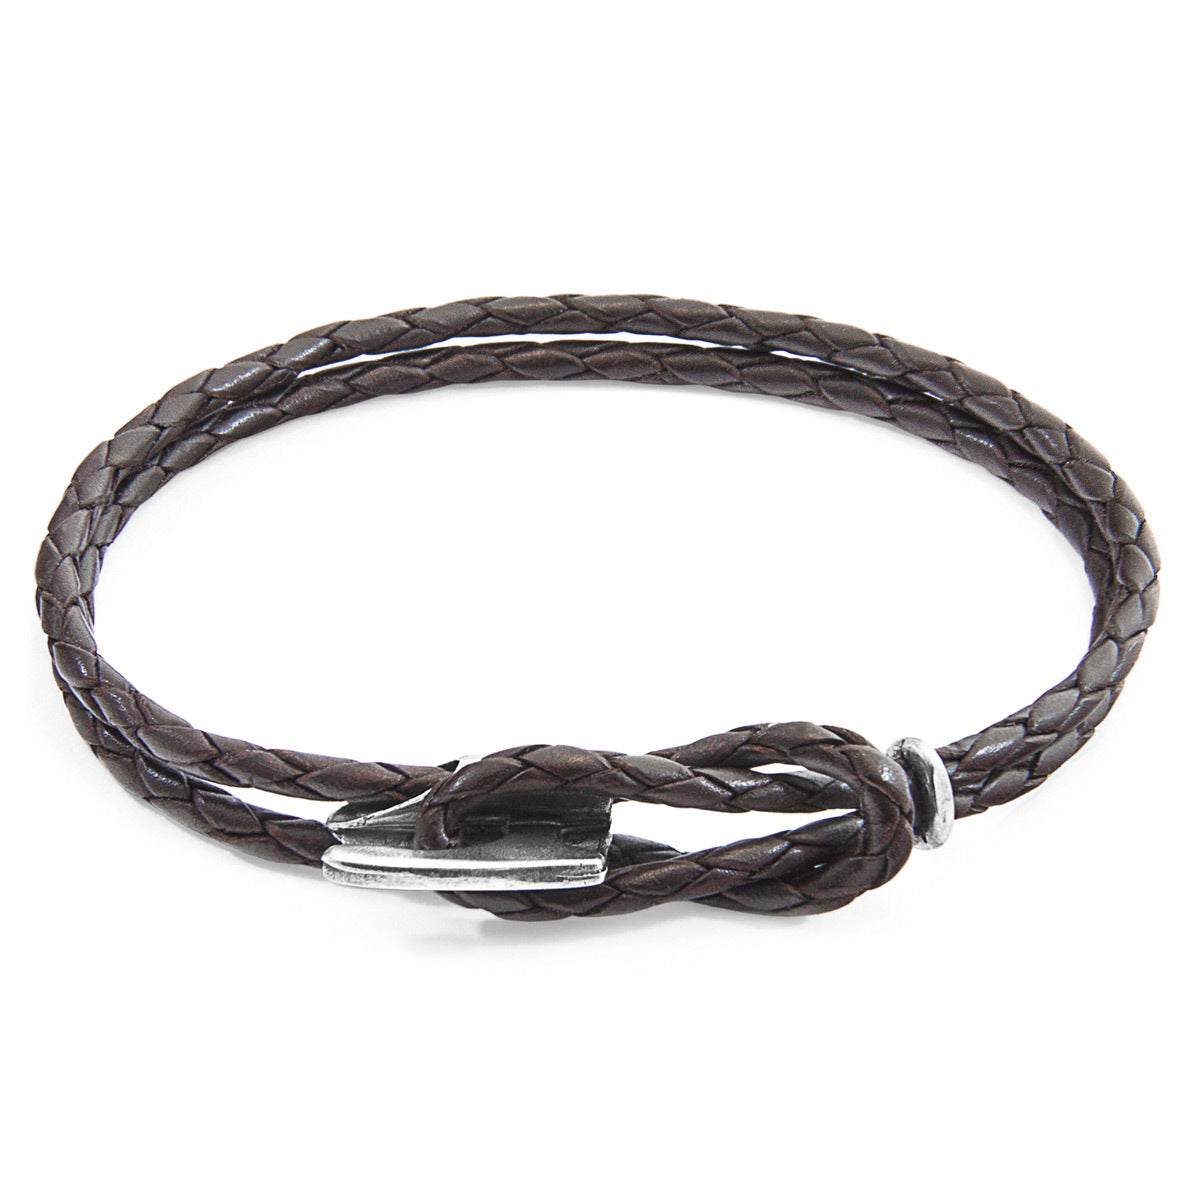 Dark Brown Padstow Silver and Leather Bracelet - Handcrafted in Great Britain with Genuine Braided Leather and Solid Sterling Silver Cleat Bijou Her